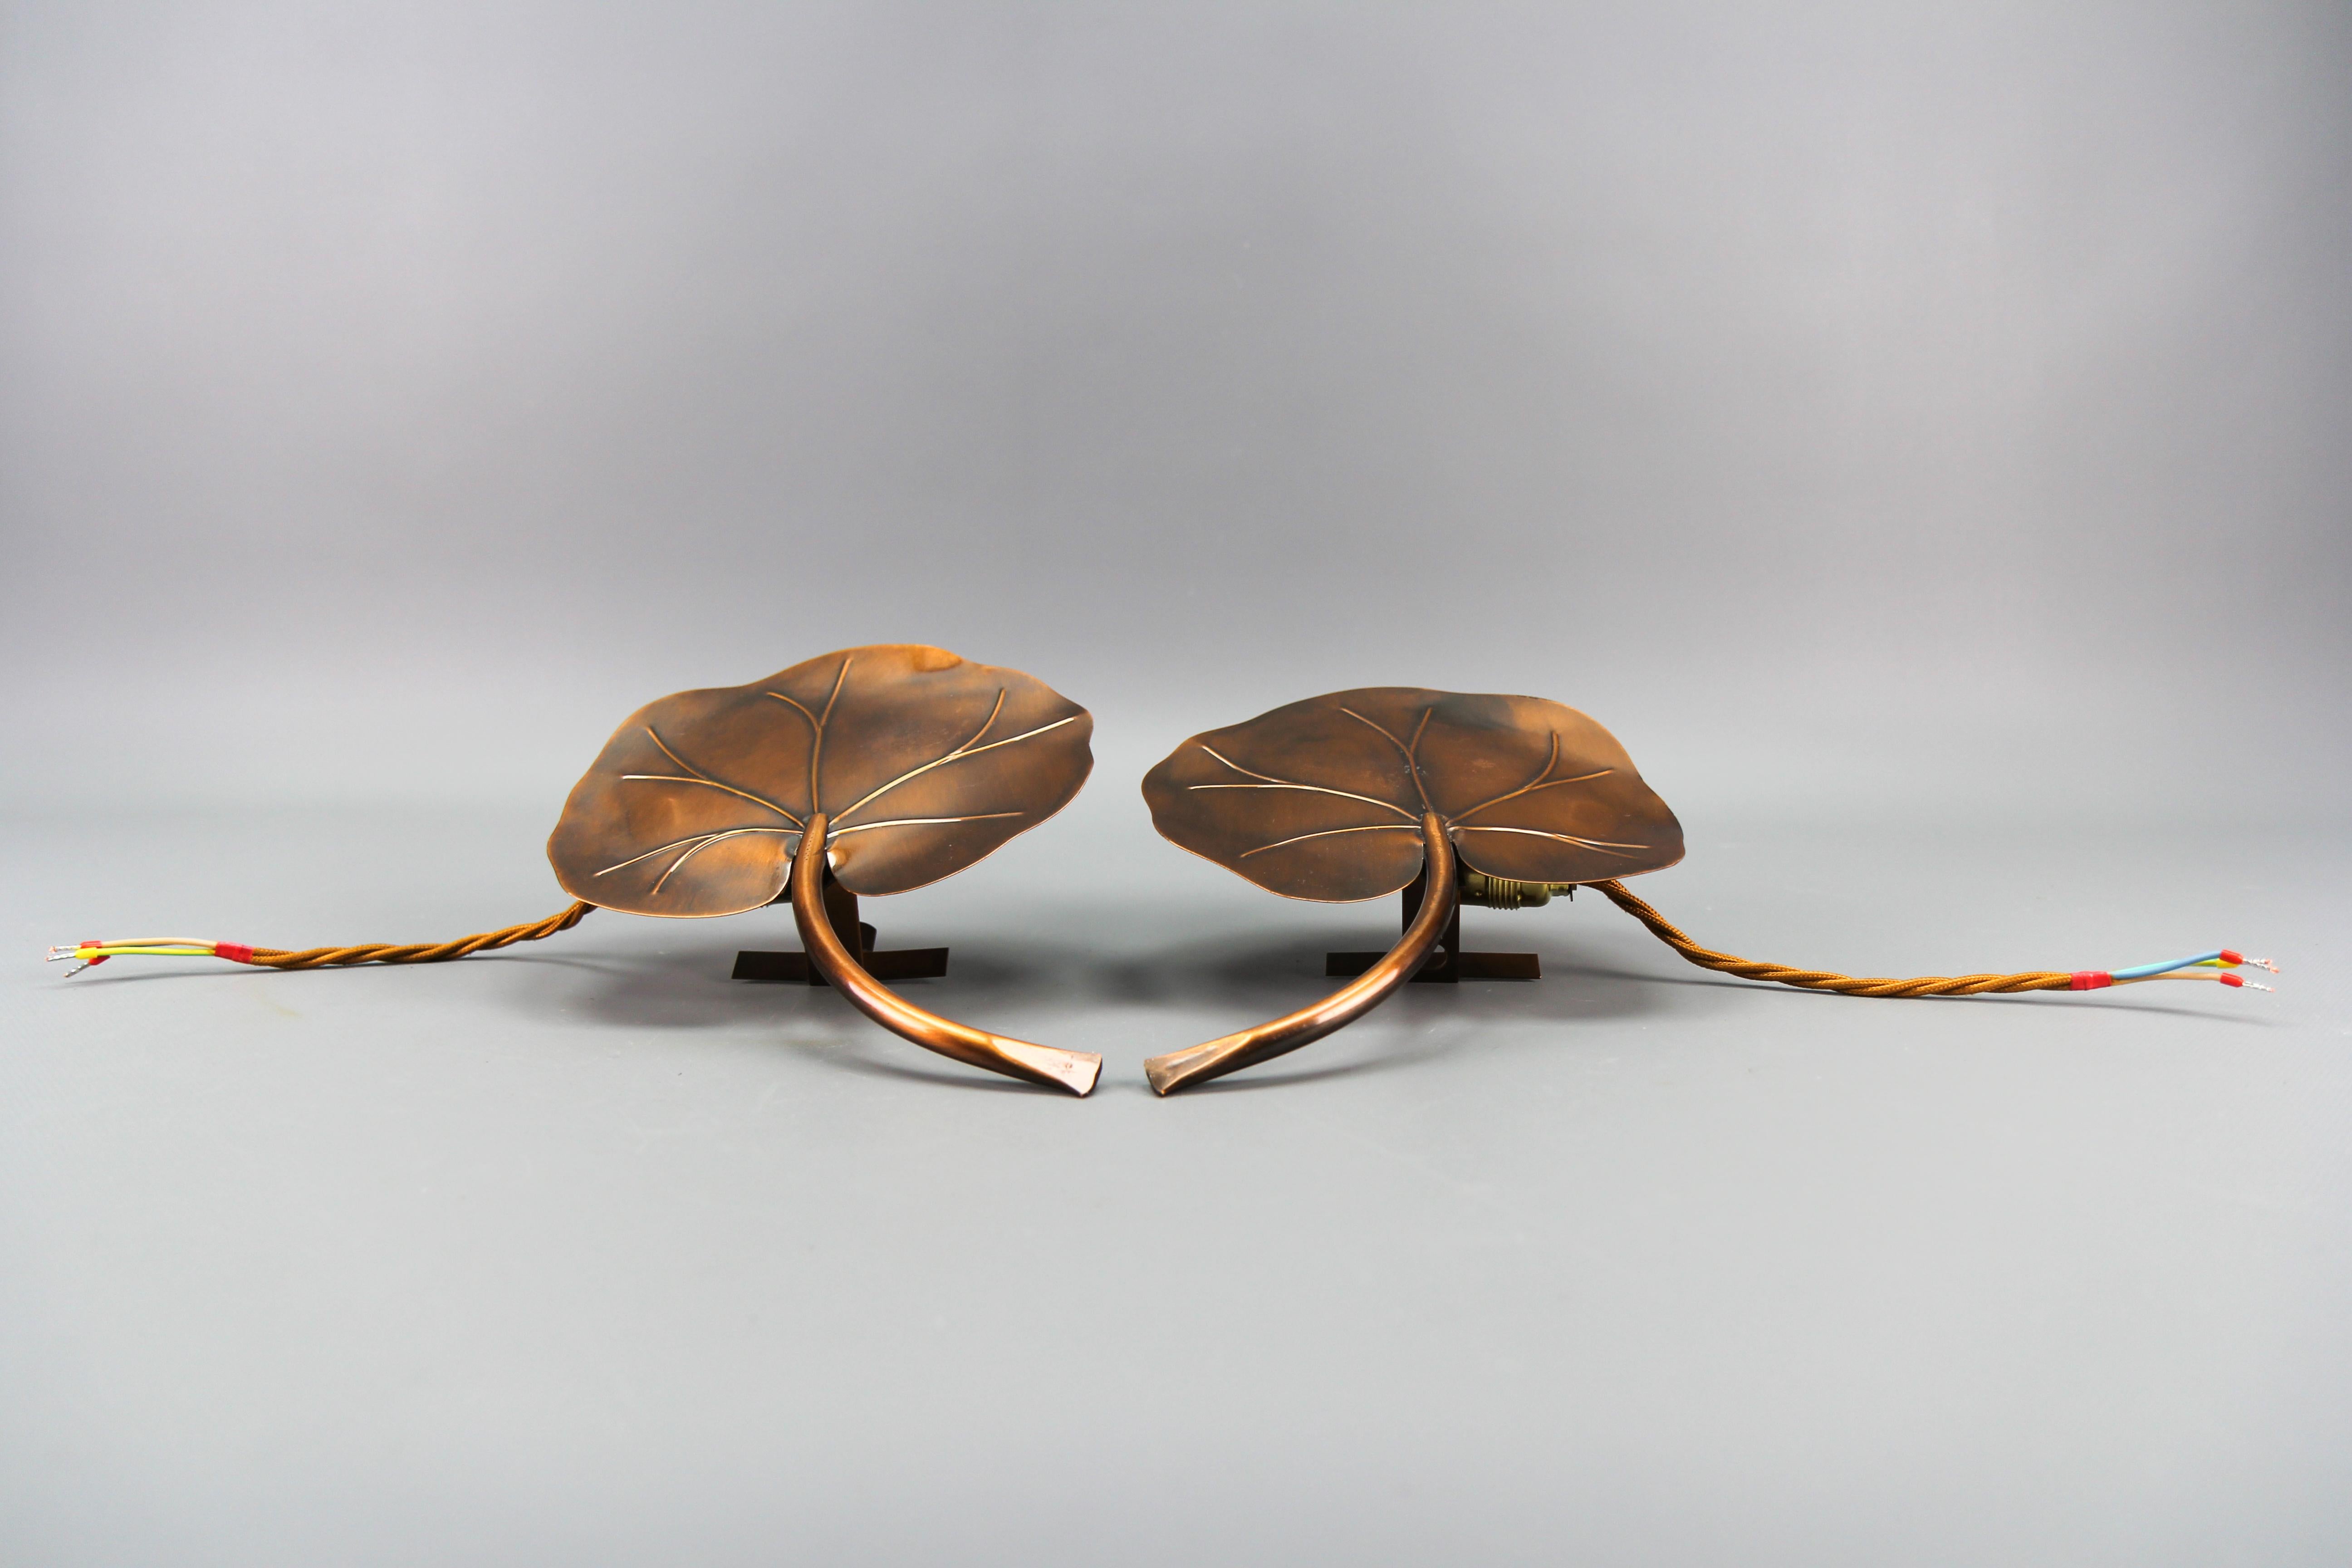 Pair of French Mid-Century Modern Brass Water Lily Leaf-Shaped Sconces For Sale 10